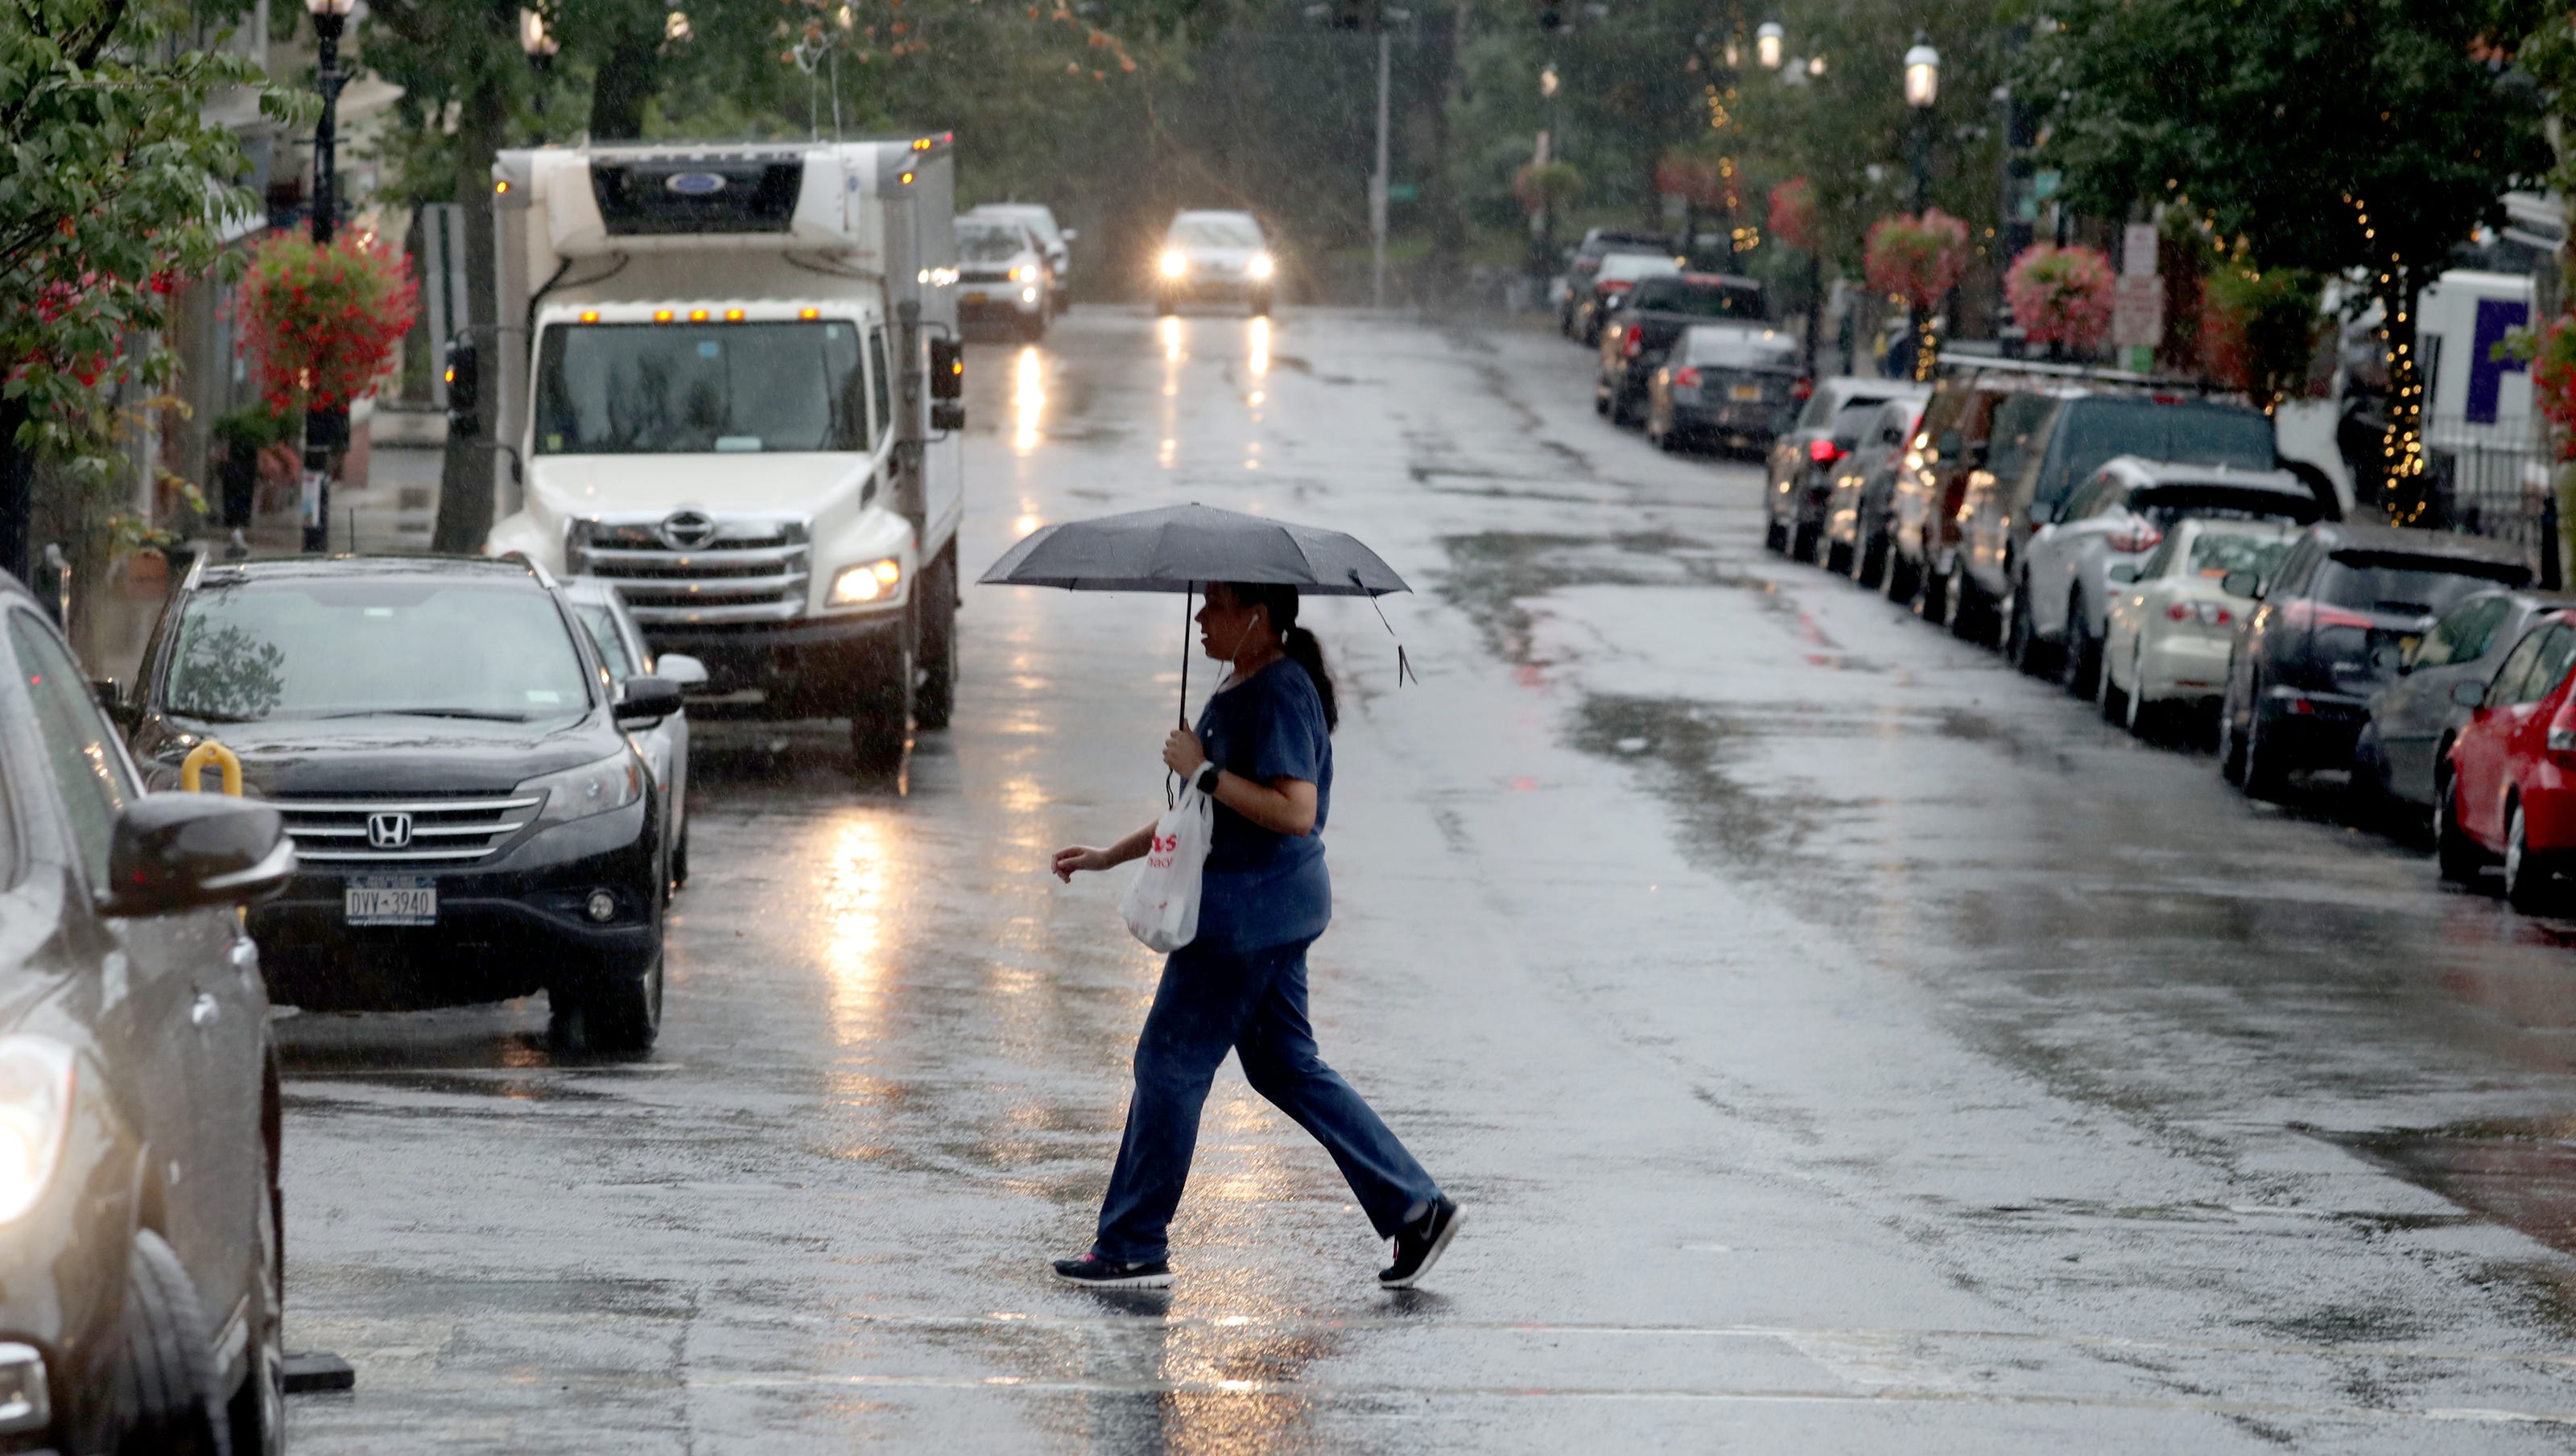 Weather: Hot, humid conditions after Saturday's rain shower